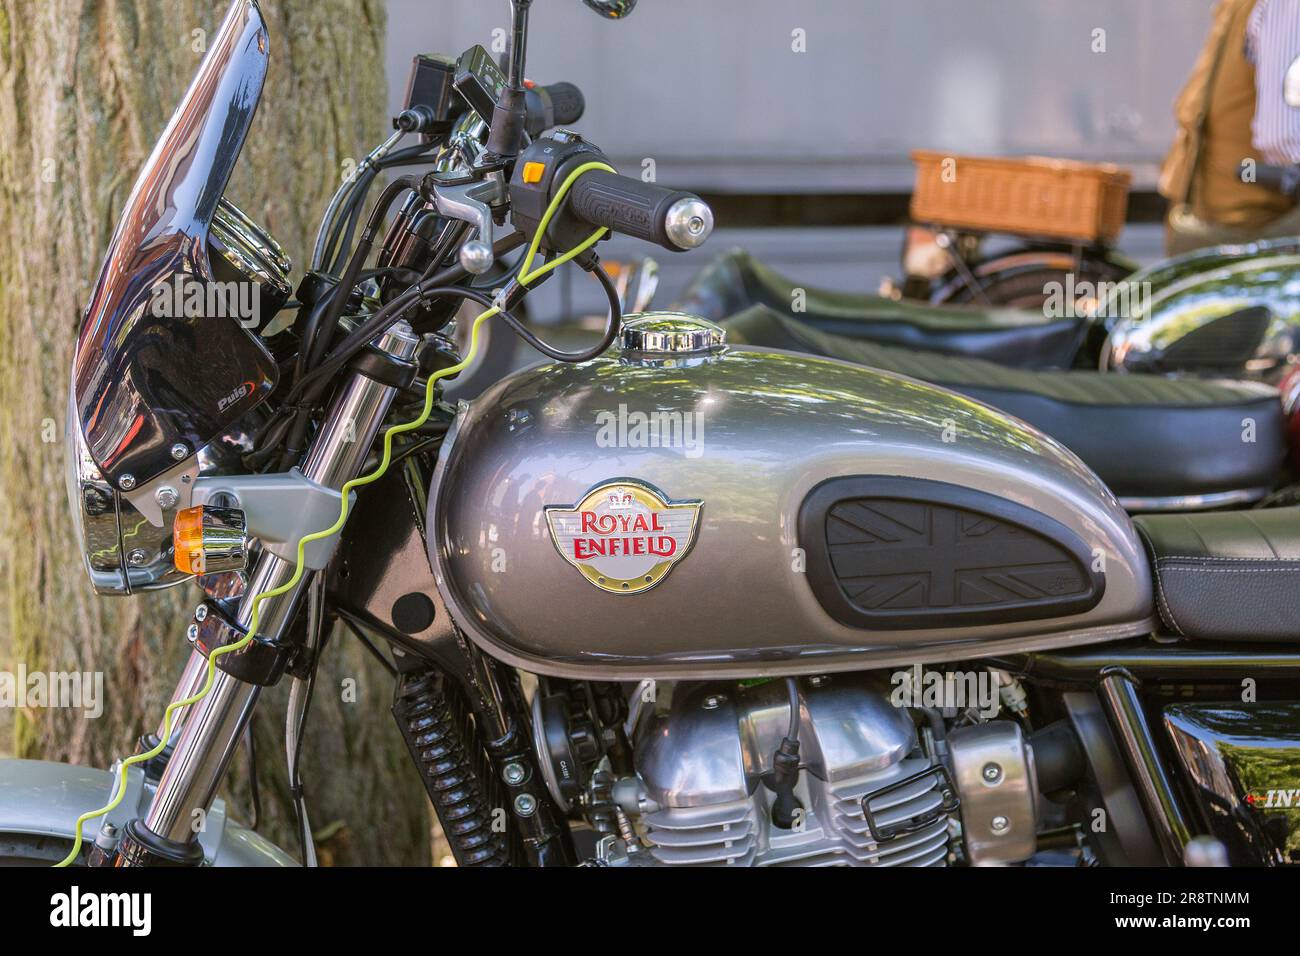 Detail of a vintage Royal Enfield Interceptor motorcycle at a classic and vintage motor show. Vintage British motorcycle. Stock Photo